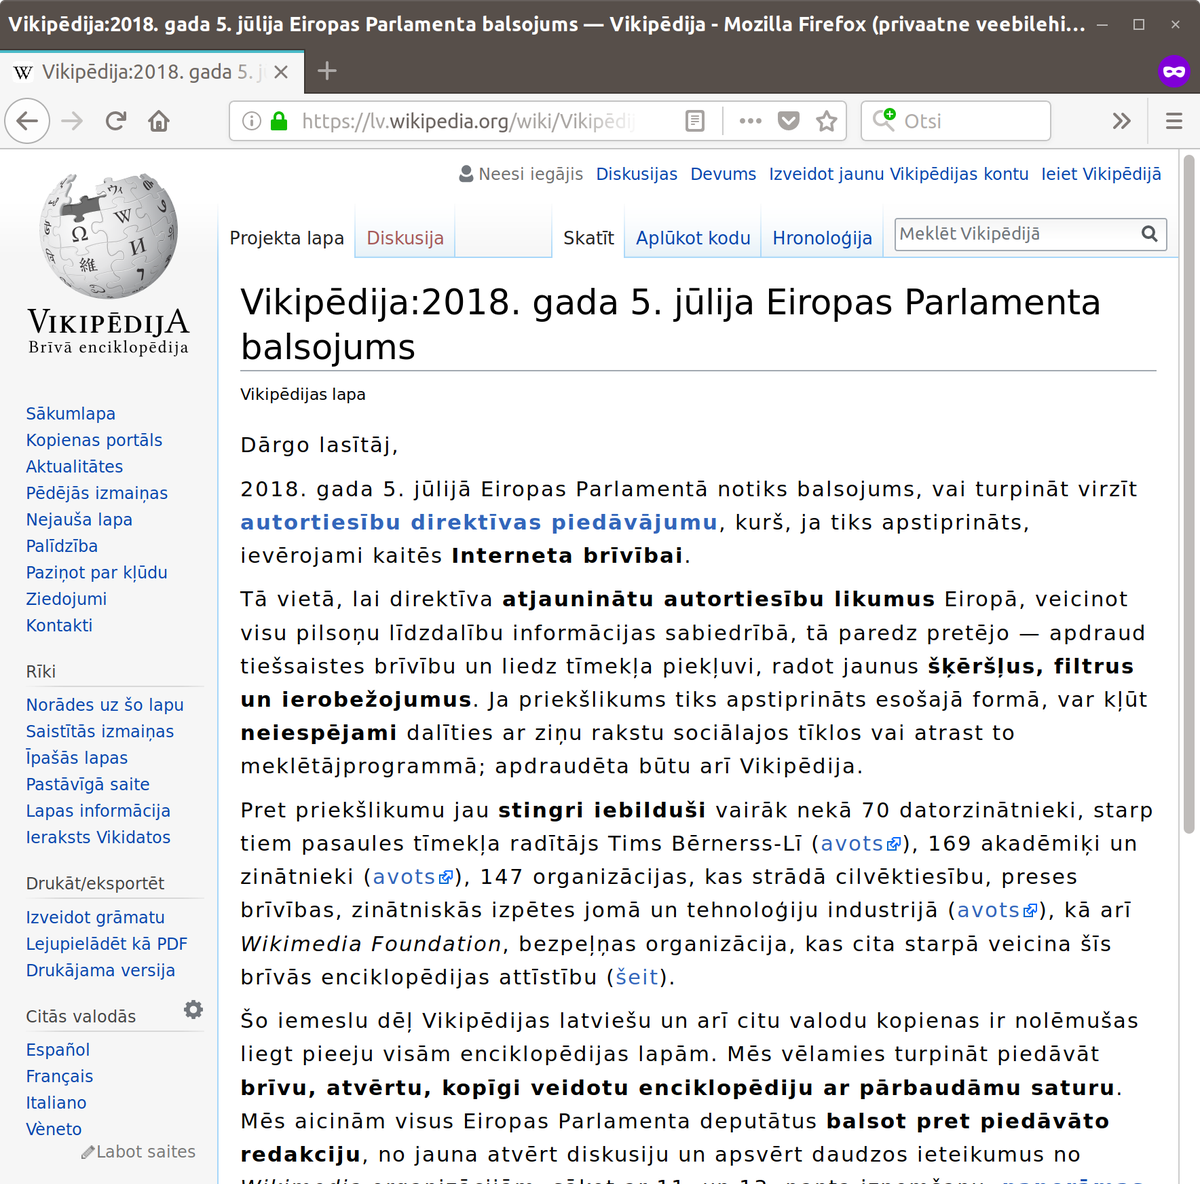 Php https ru wikipedia org. Русская Википедия. Wikipedia ru. Википедия на русском языке. По данным русской Википедии.